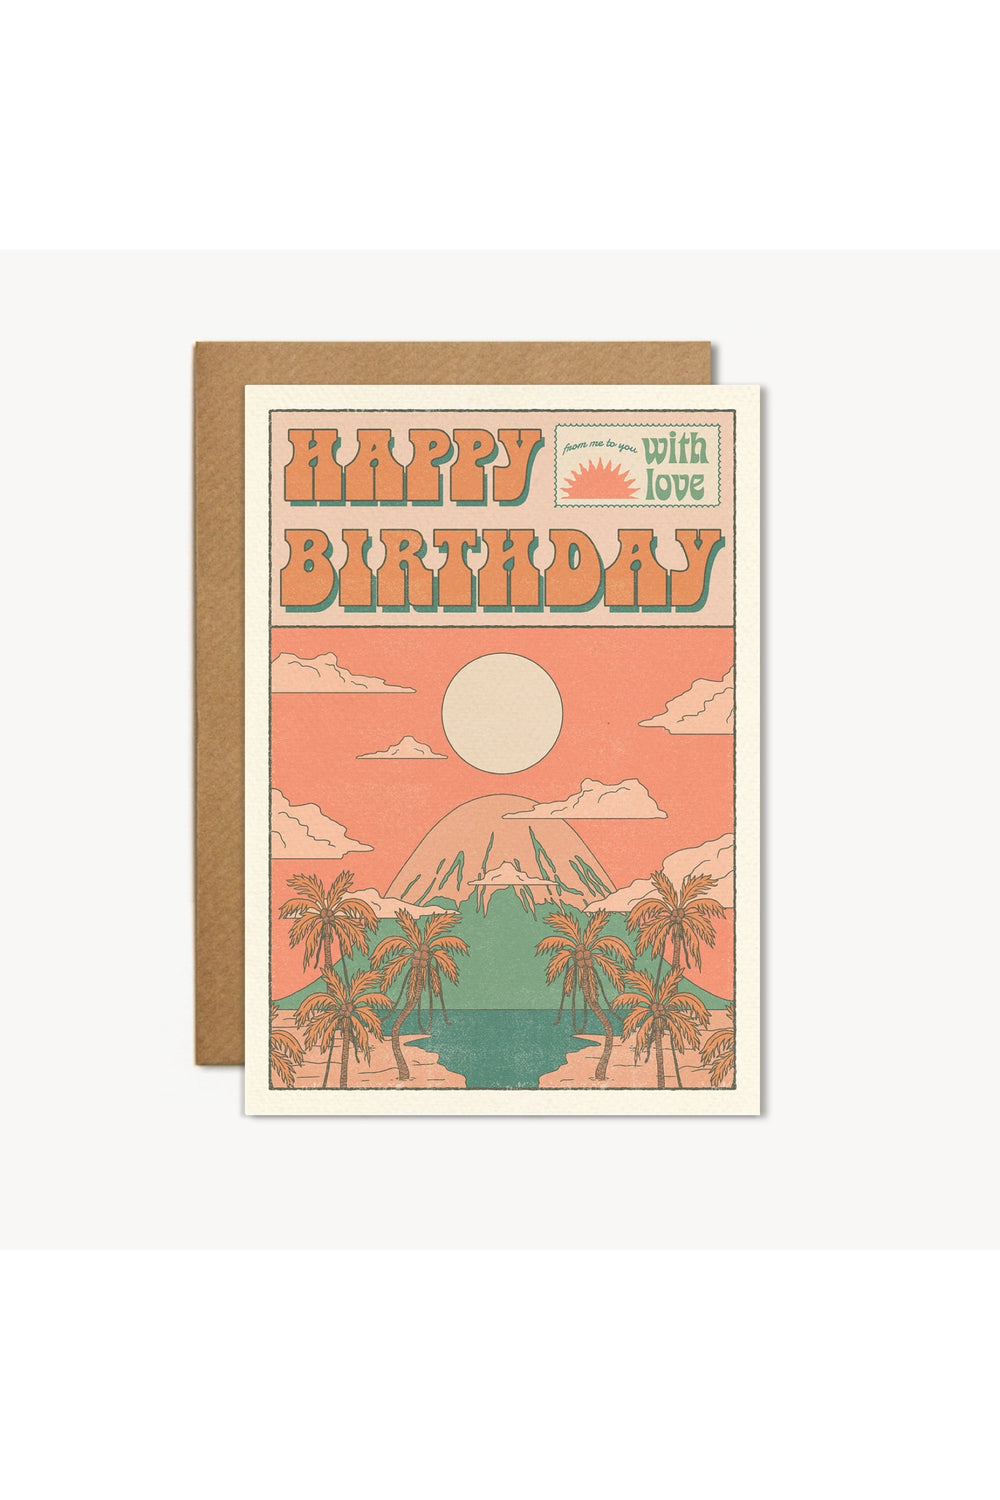 Happy Birthday With Love Card